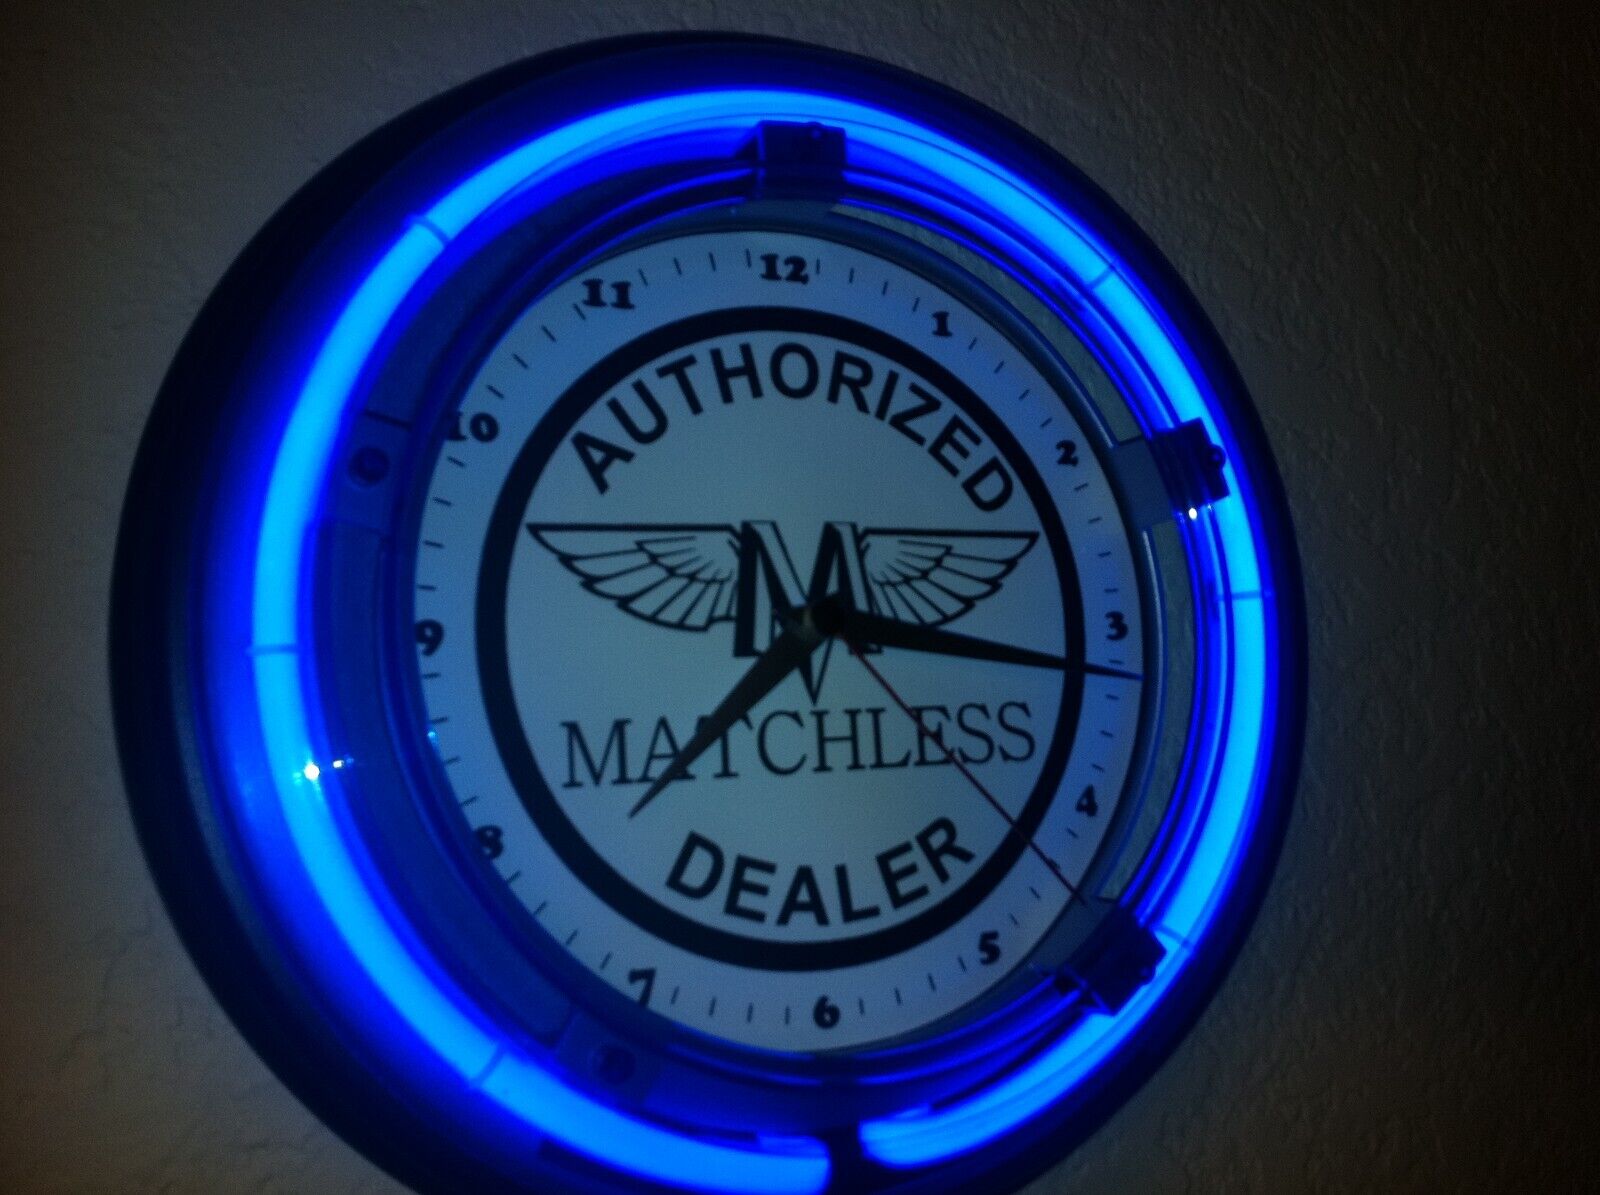 Matchless Motorcycle Bike Man Cave Bar Neon Wall Clock Advertising Sign